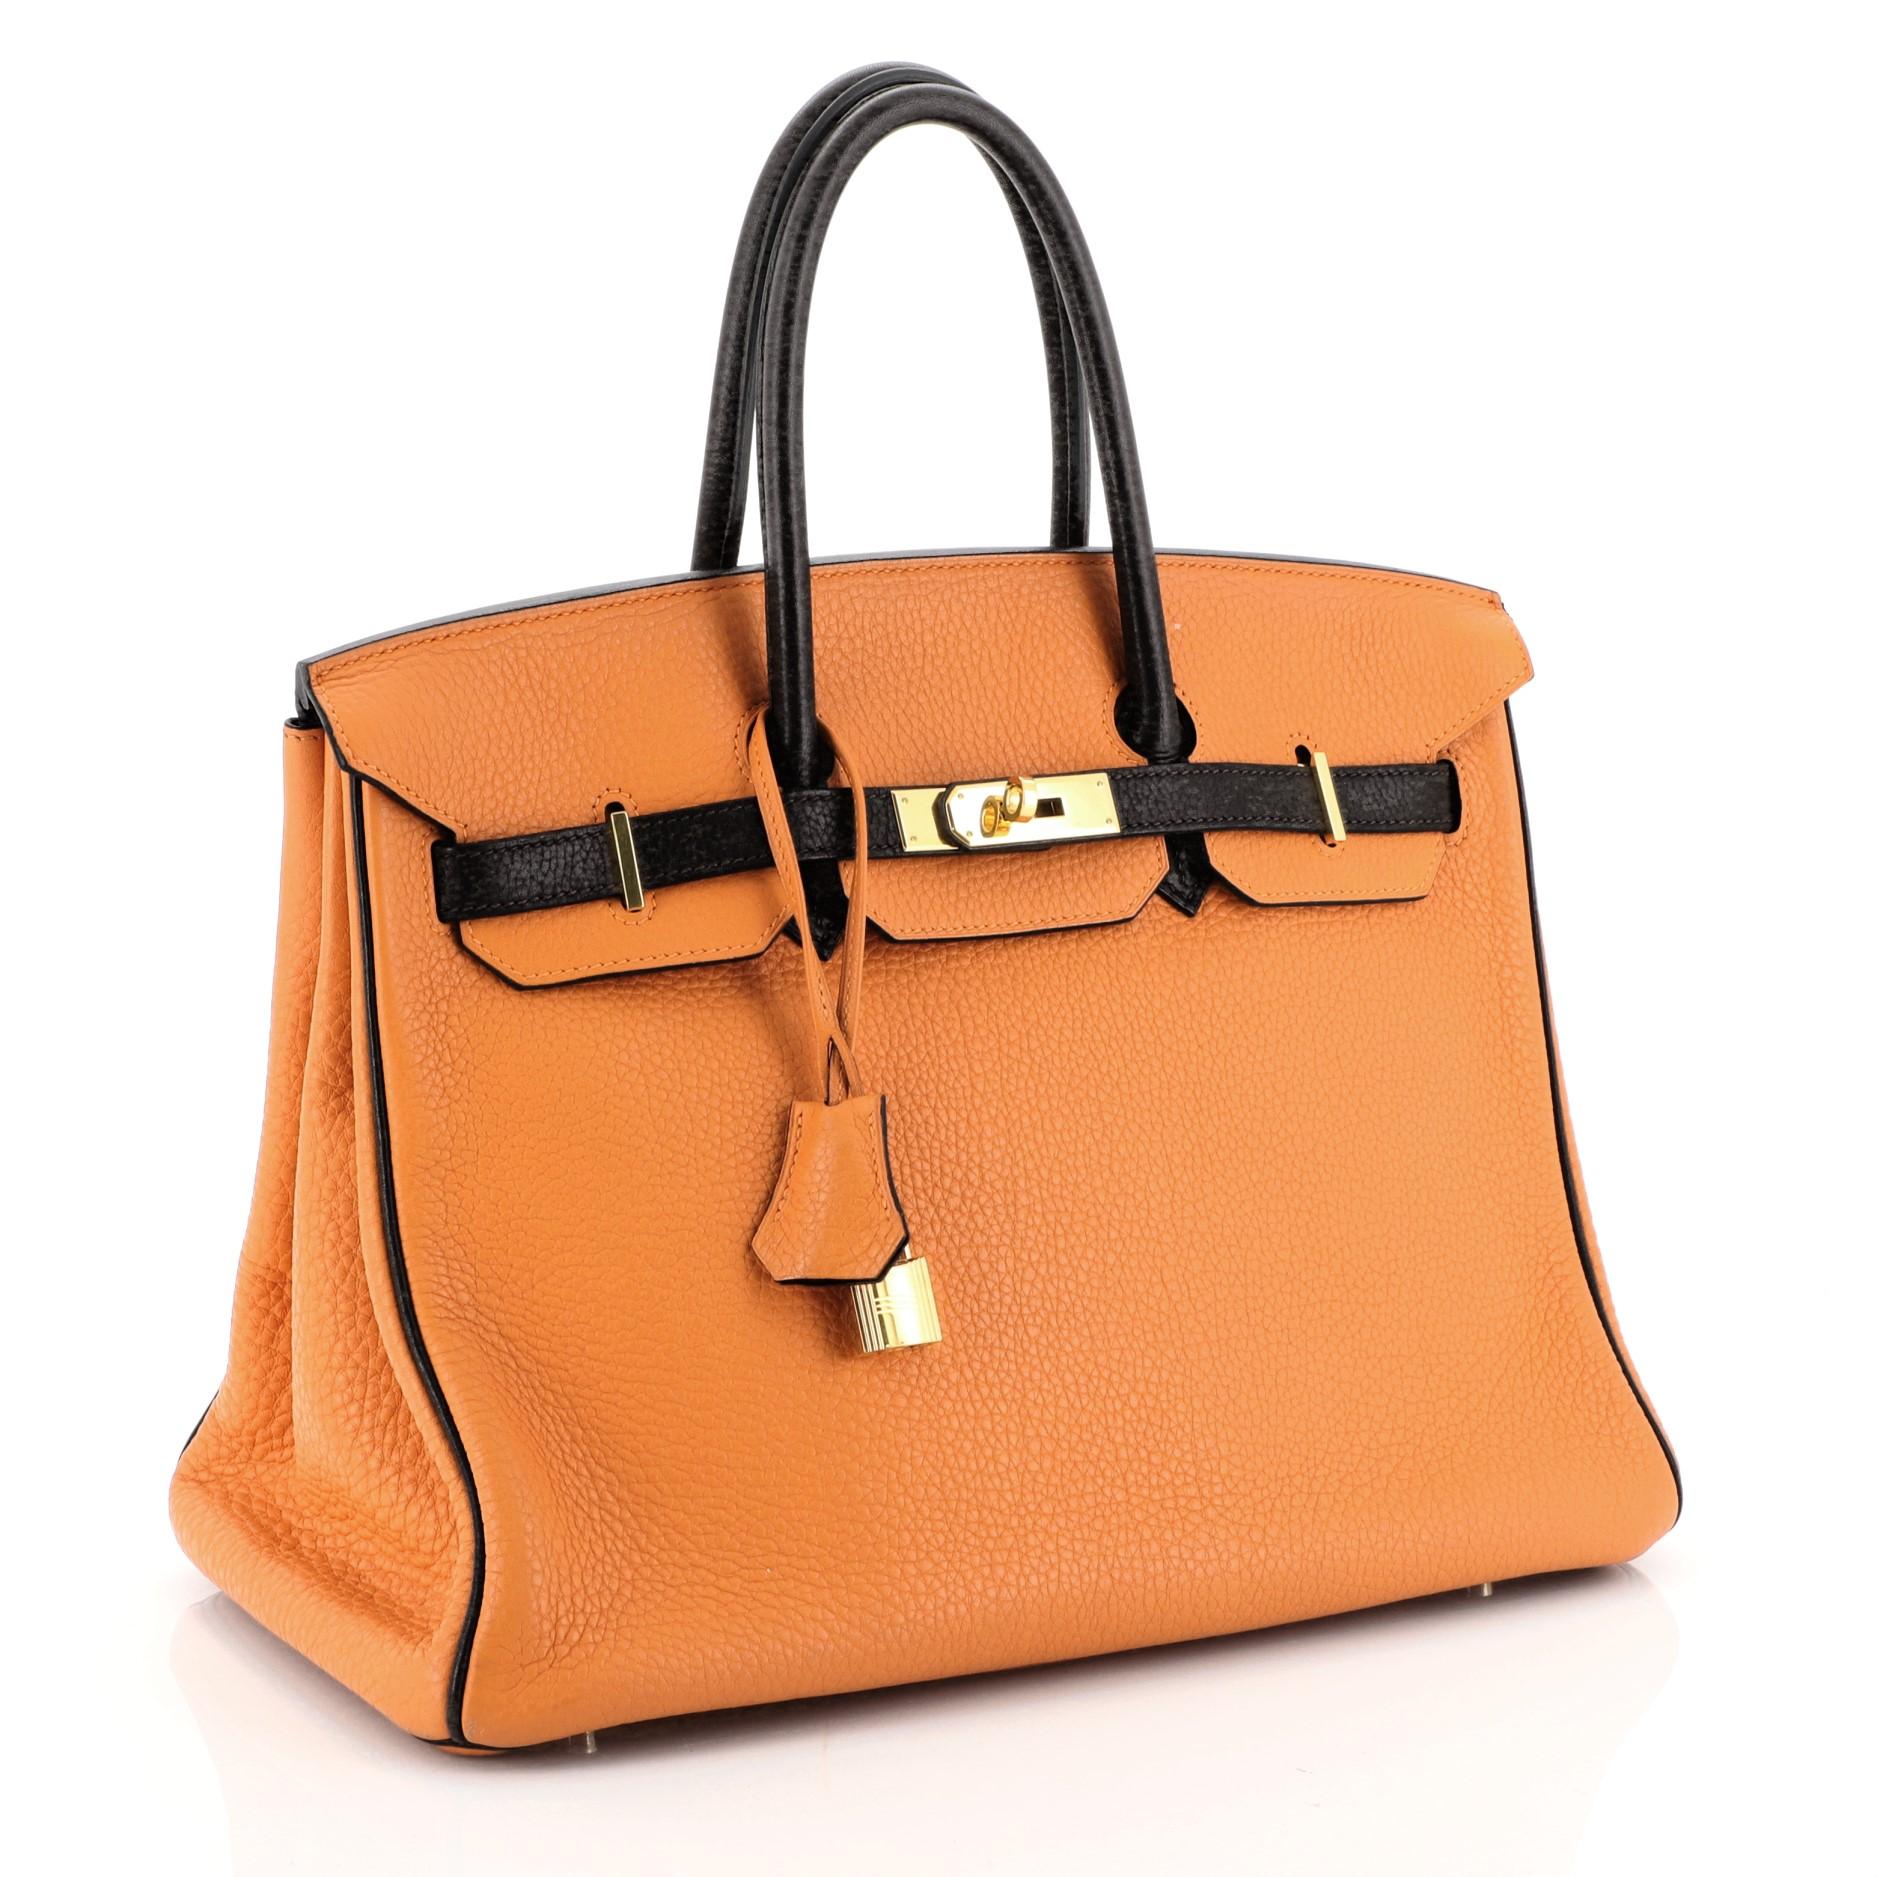 This Hermes Birkin Handbag Bicolor Clemence With Gold Hardware 35, crafted in Orange H and Ebene Clemence leather, features dual rolled handles, frontal flap, and gold hardware. Its turn-lock closure opens to an Ebene Chevre leather interior with